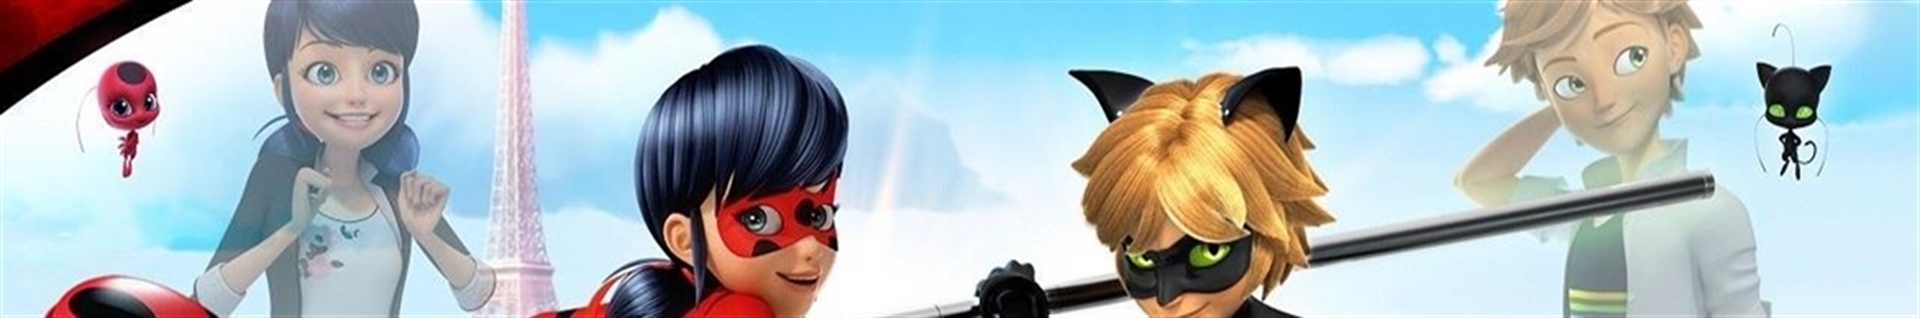 ❤ Miraculous | Tales Of Ladybug and Catnoir ❤